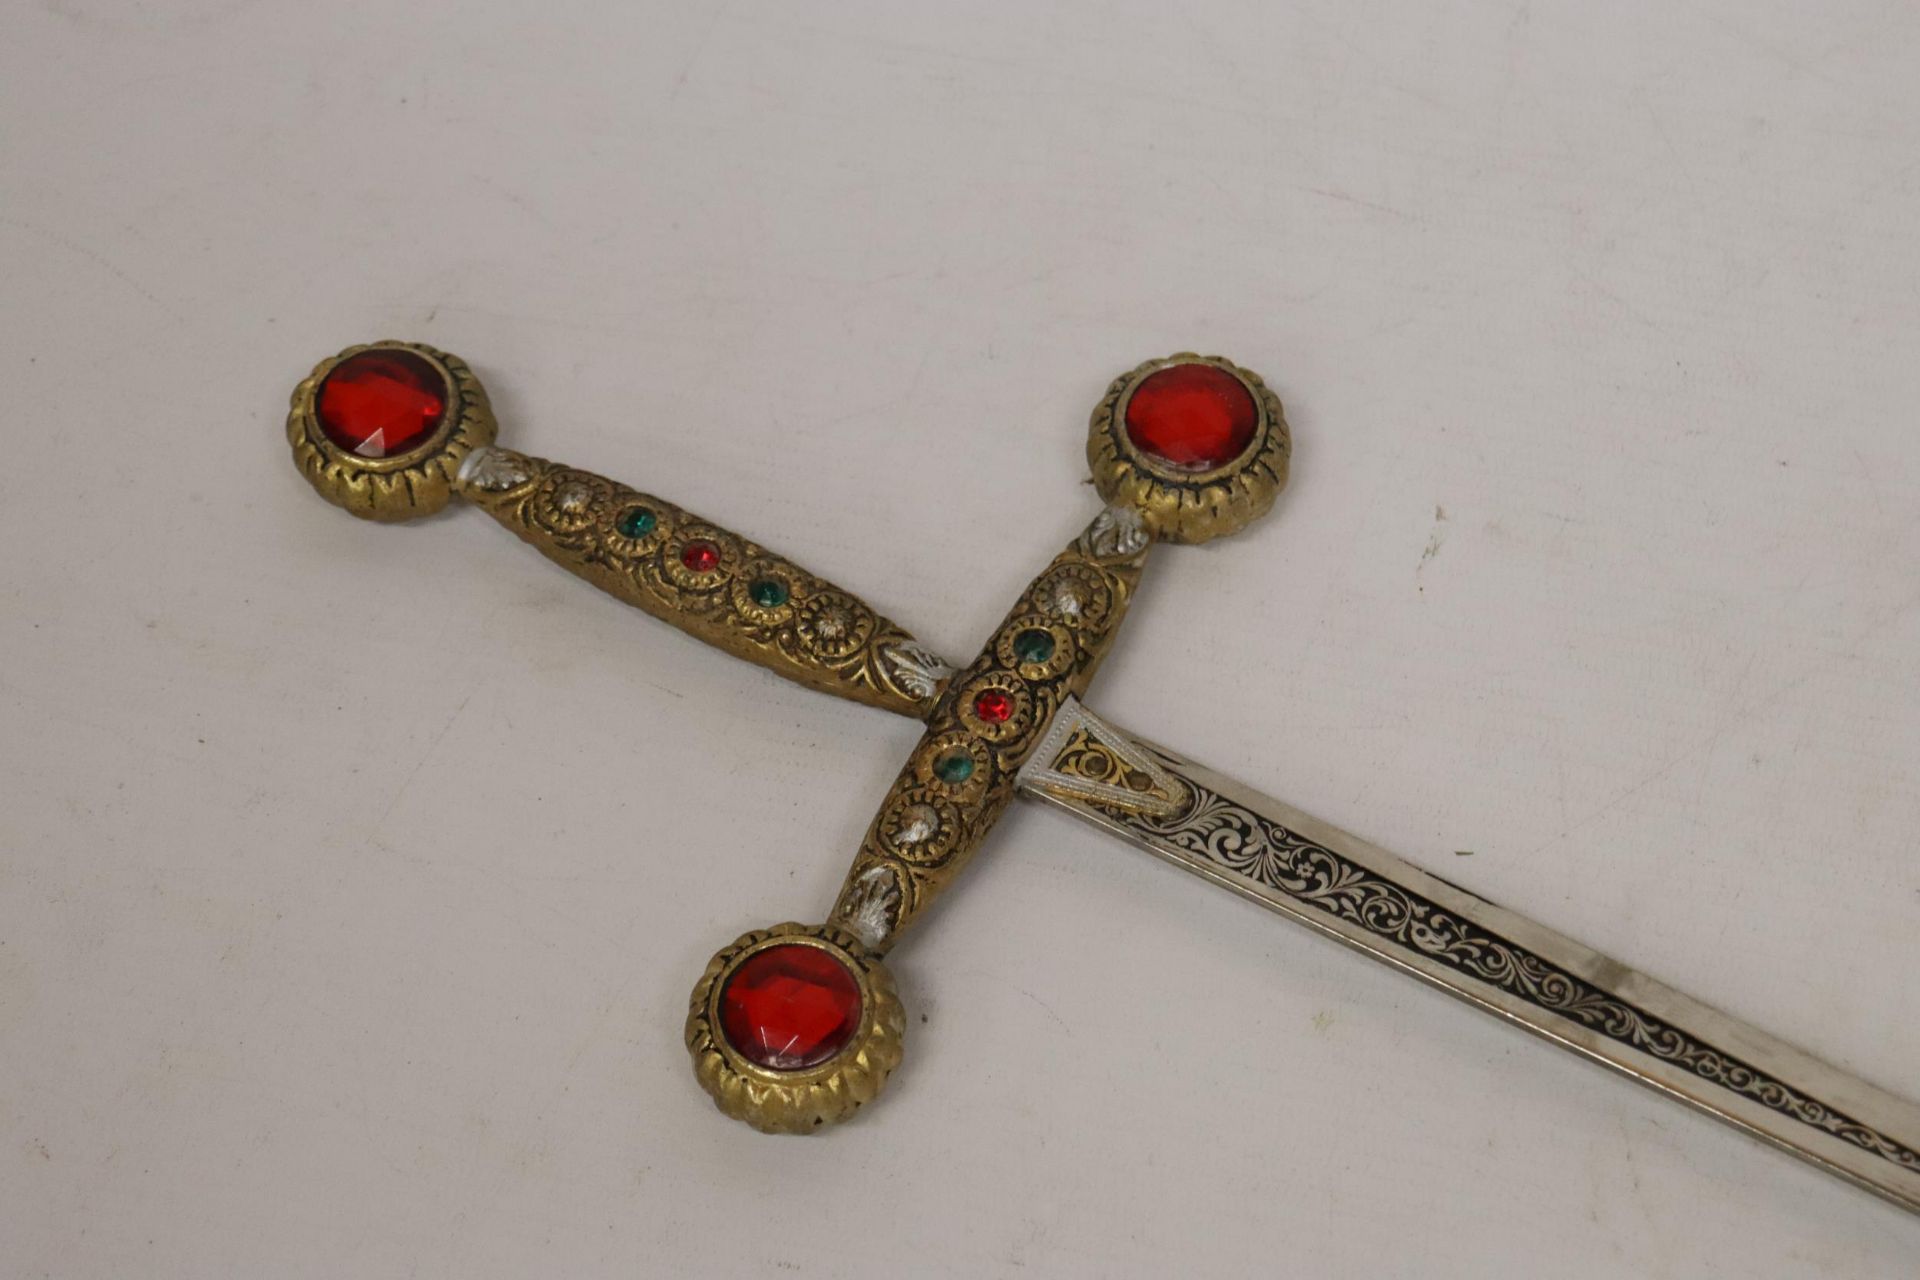 A SPANISH JEWELLED ORNAMENTAL SWORD MADE OF TOLEDO STEEL, LENGTH 31 INCHES - Image 2 of 5